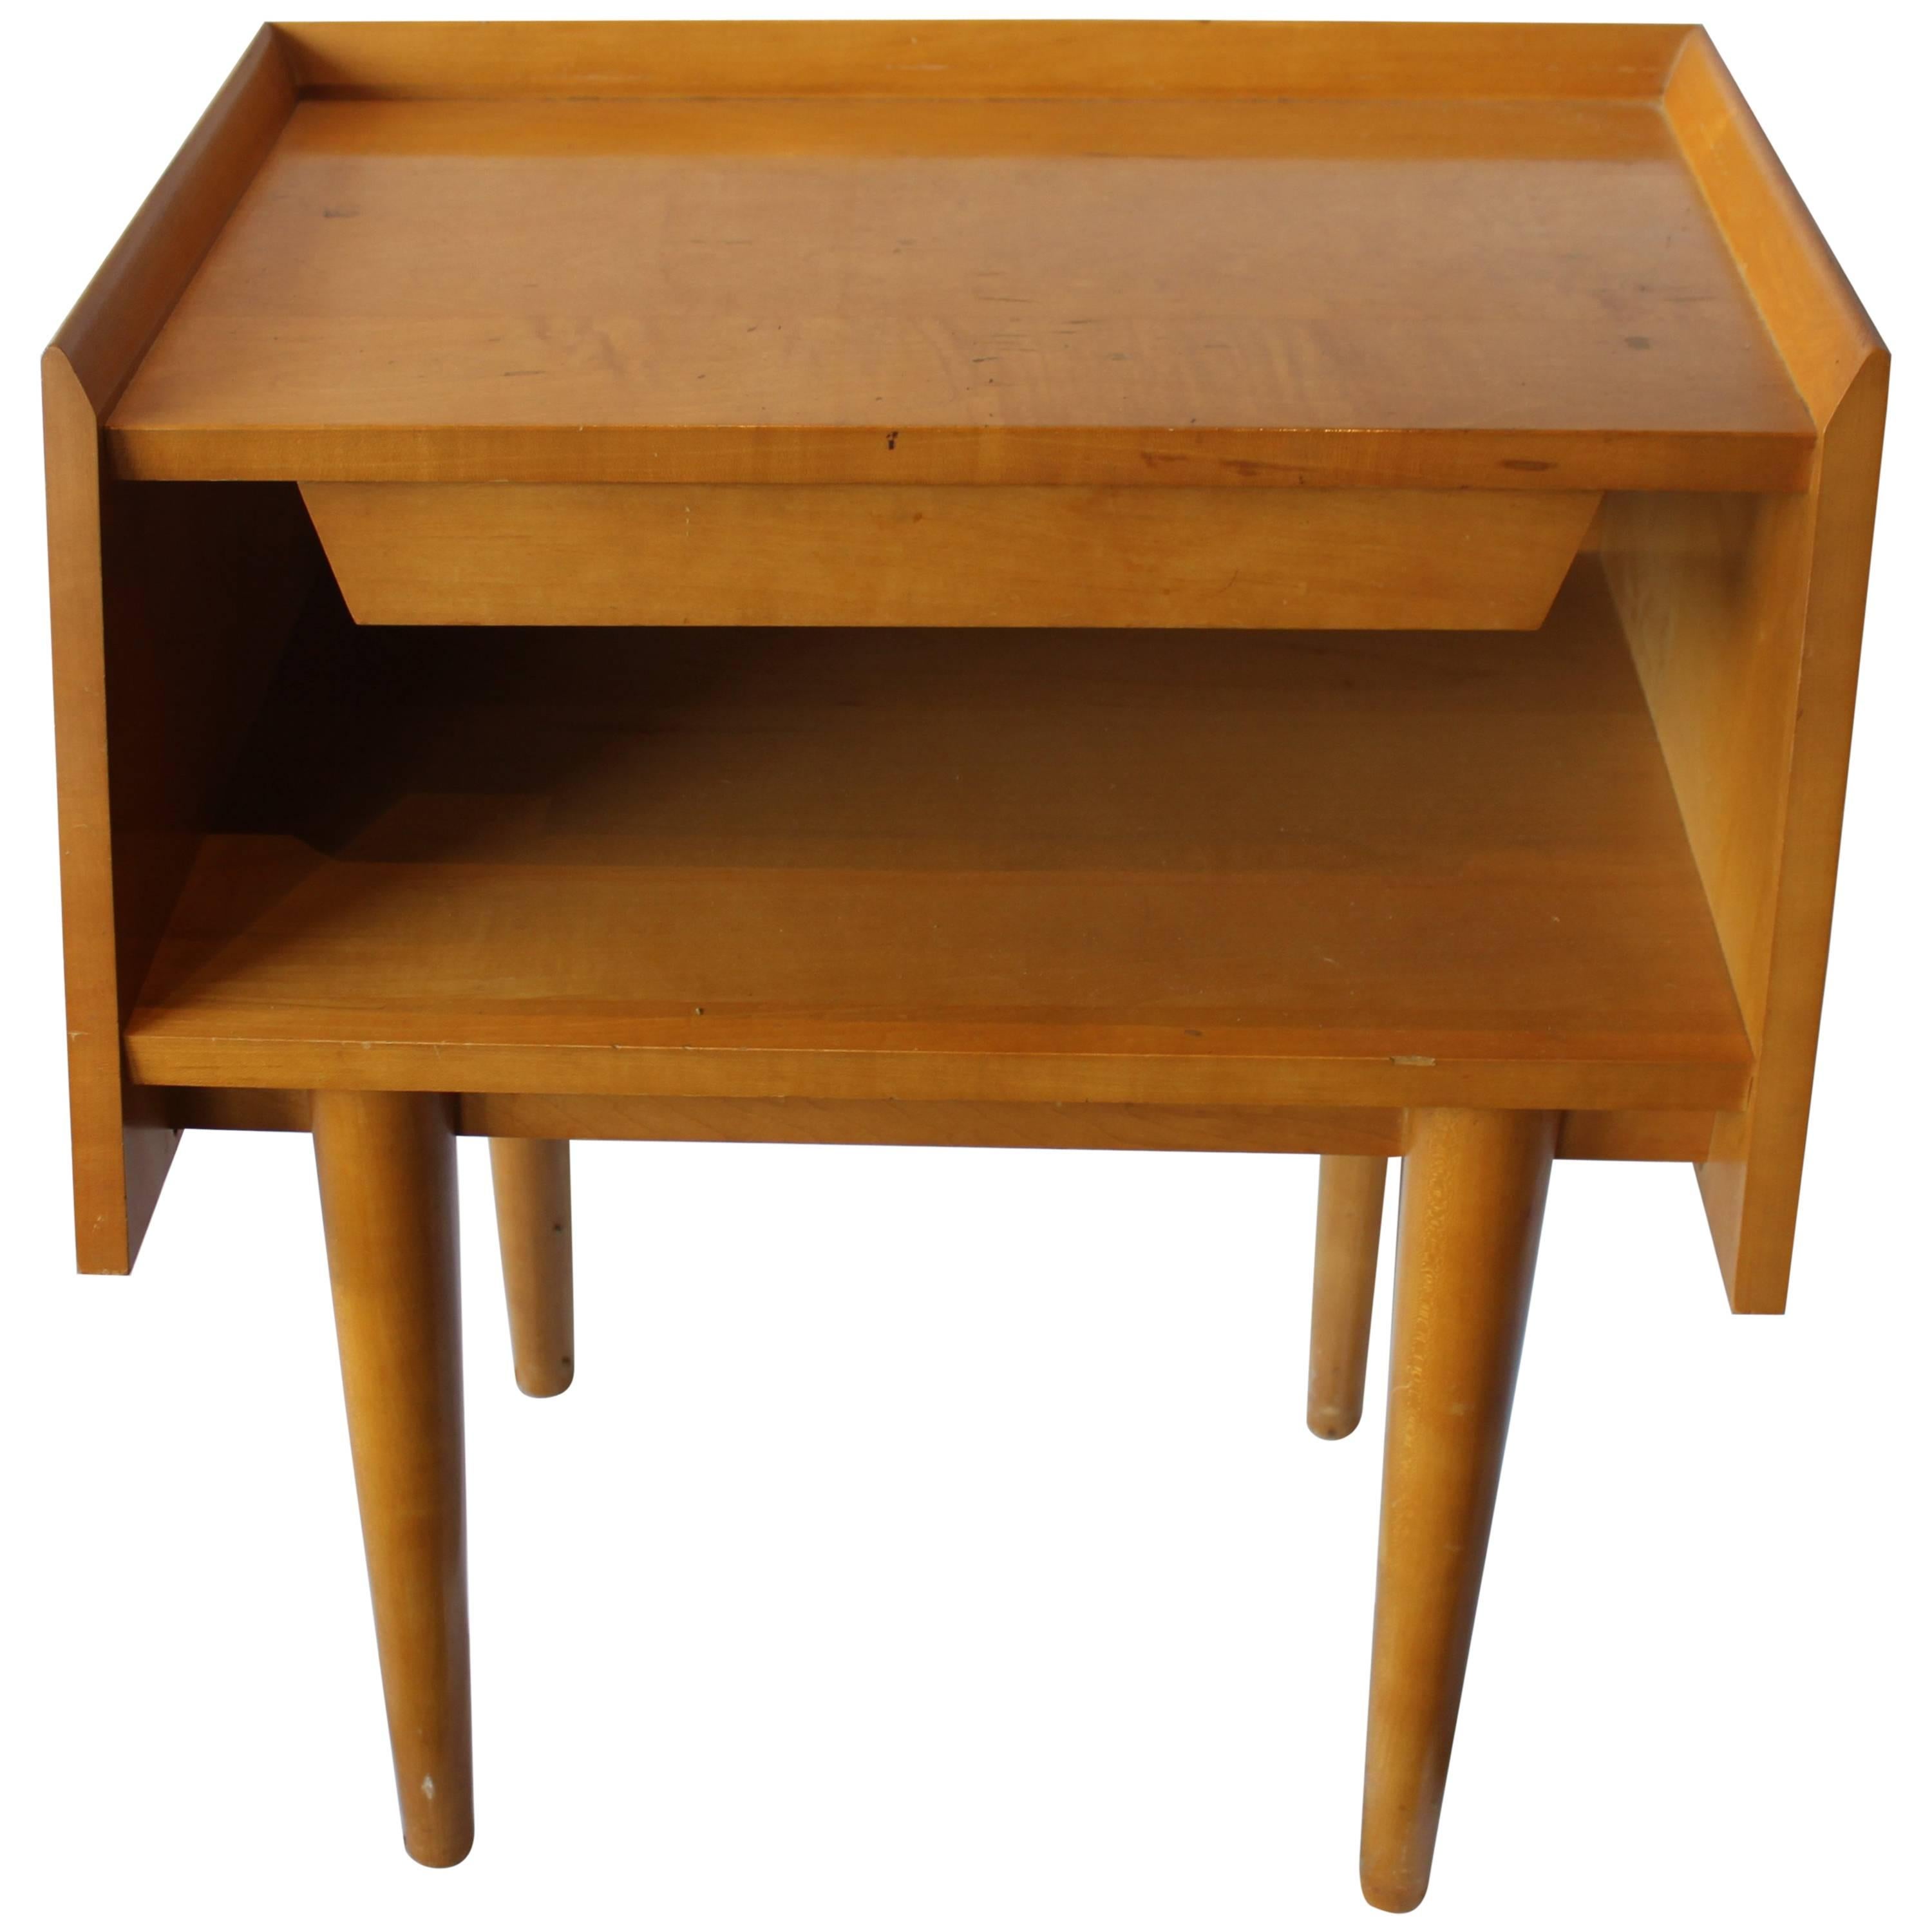 Crawford Mid-Century Modern Nightstand with Drawer